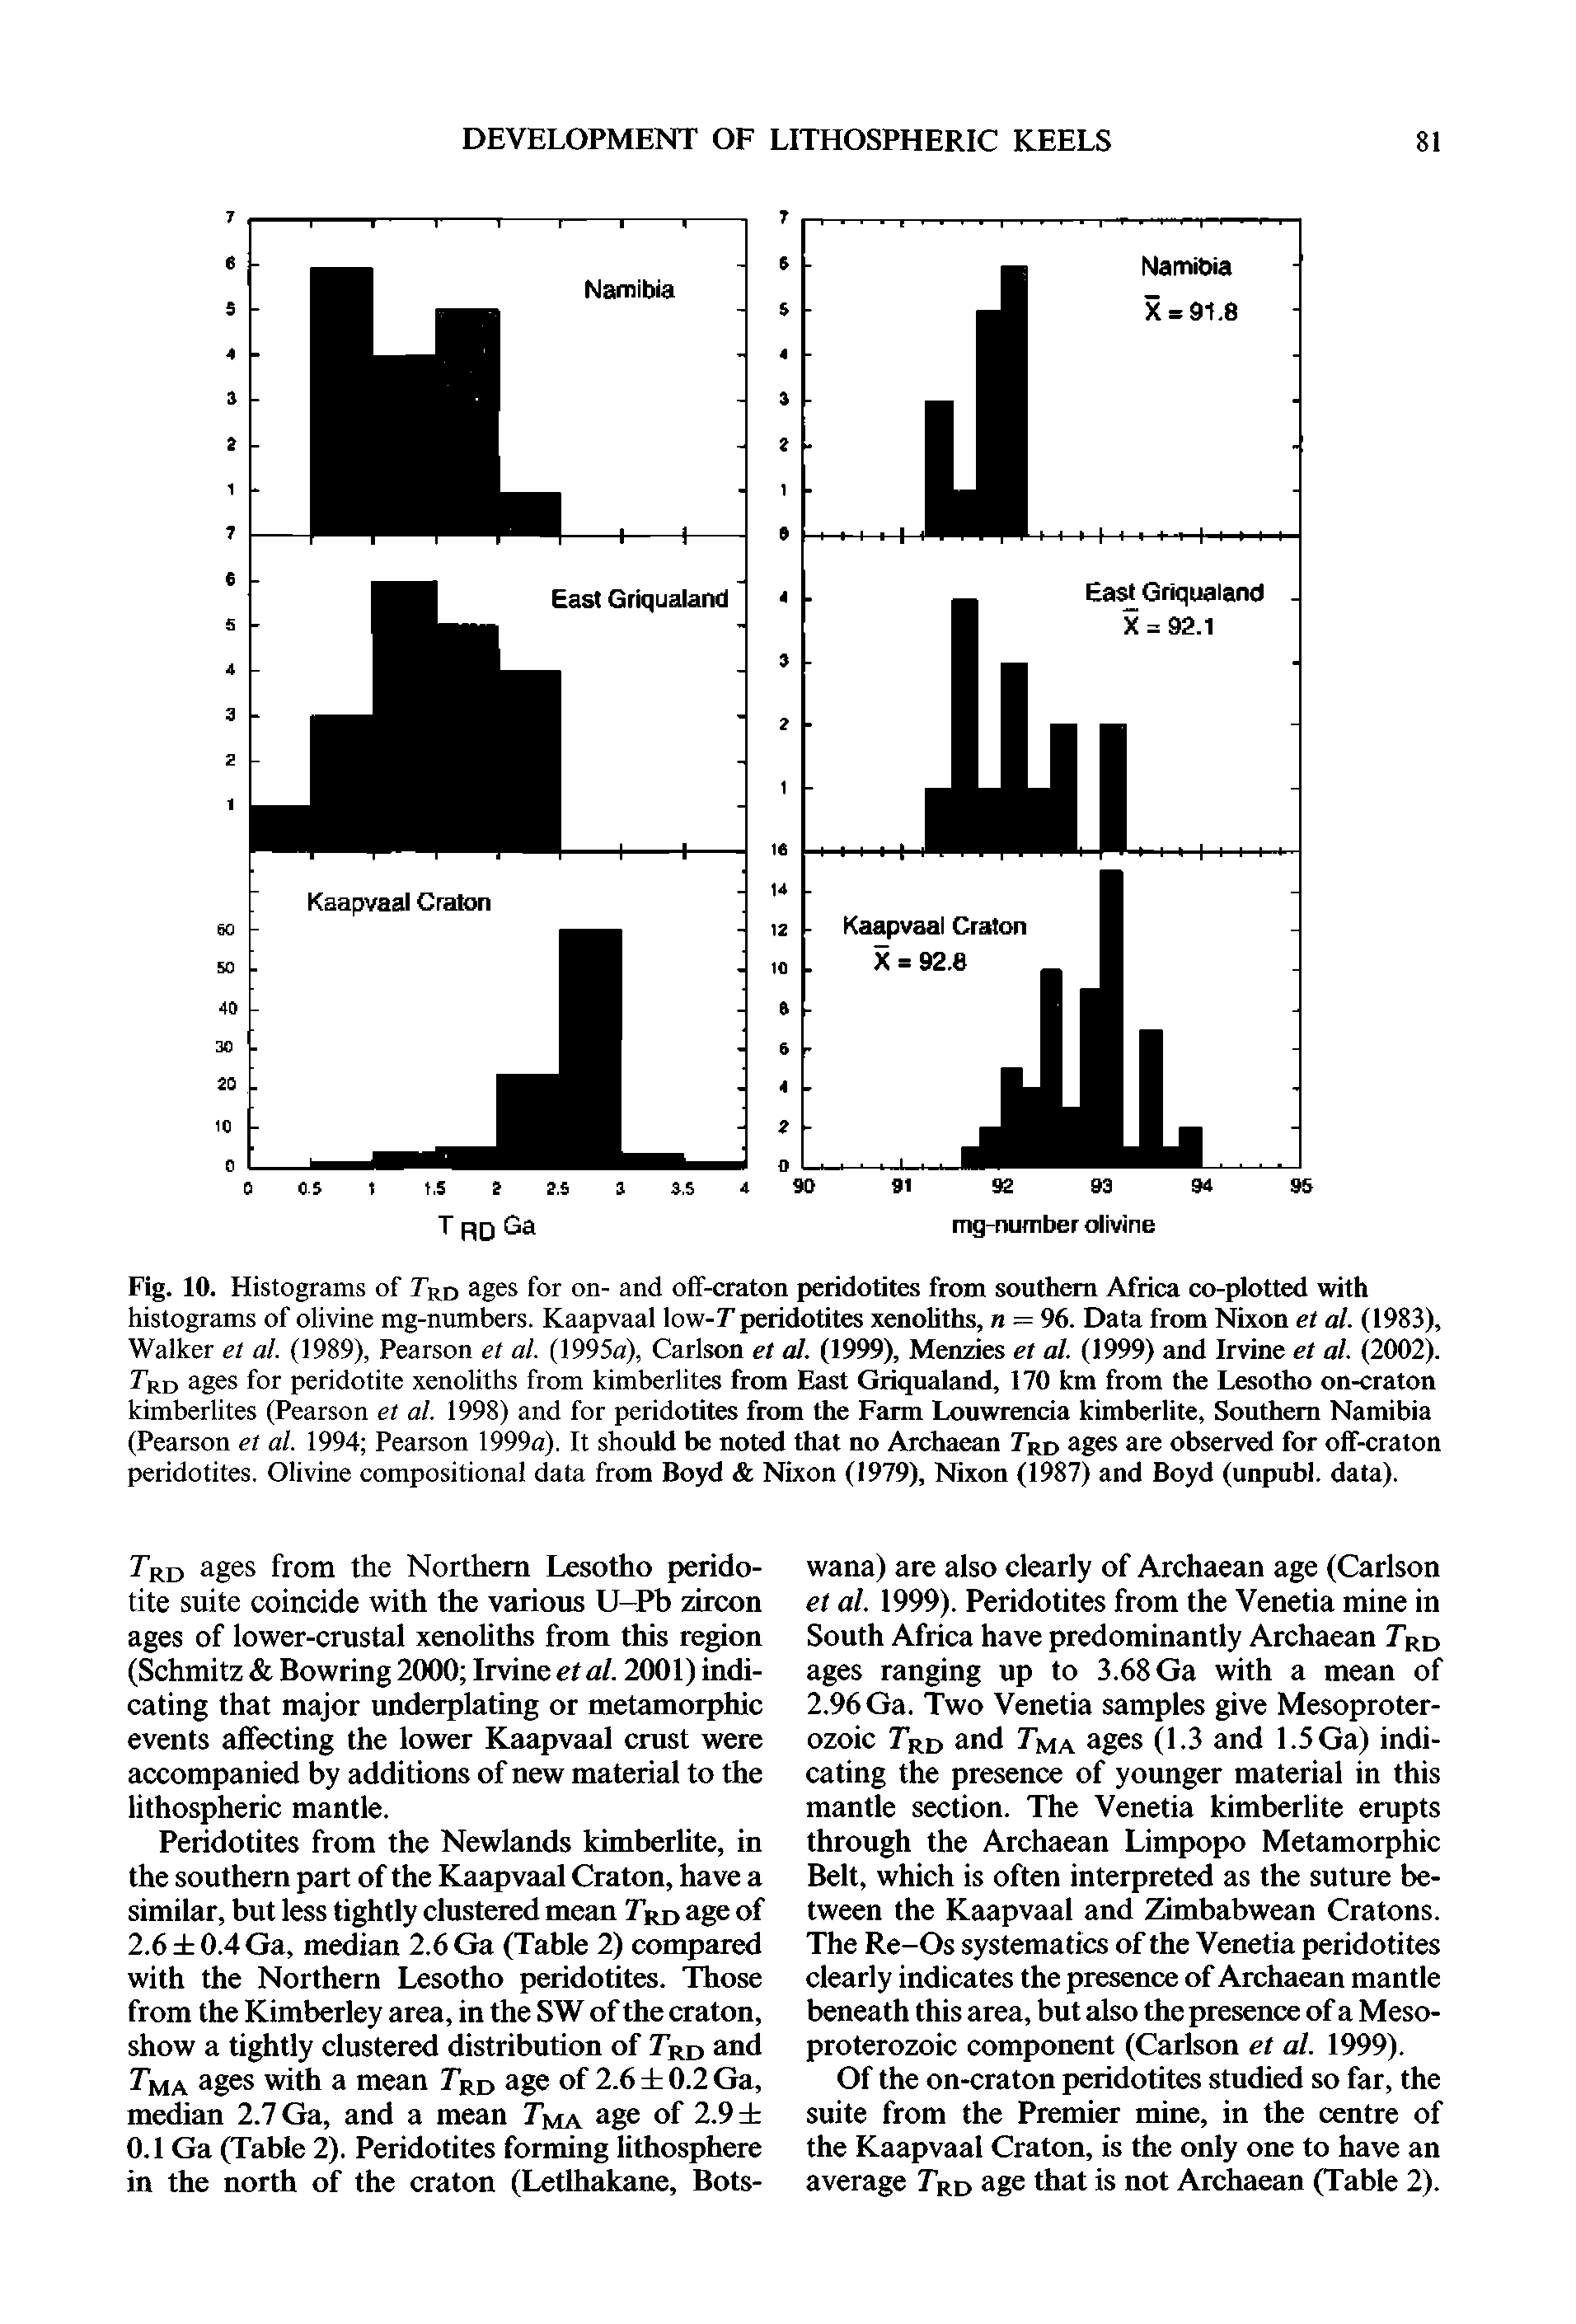 Fig. 10. Histograms of Trd ages for on- and off-craton peridotites from southern Africa co-plotted with histograms of olivine mg-numbers. Kaapvaal low-L peridotites xenohths, n = 96. Data from Nixon et al. (1983), Walker et al. (1989), Pearson et al. (1995a), Carlson et al. (1999), Menzies et al. (1999) and Irvine et al. (2002). Lrd ages for peridotite xenoliths from kimberlites from East Griqualand, 170 km from the Lesotho on-craton kimberlites (Pearson et al. 1998) and for peridotites from the Farm Louwrencia kimberlite. Southern Namibia (Pearson et al. 1994 Pearson 1999a). It should be noted that no Archaean Trd ages are observed for off-craton peridotites. Olivine compositional data from Boyd Nixon (1979), Nixon (1987) and Boyd (unpubl. data).